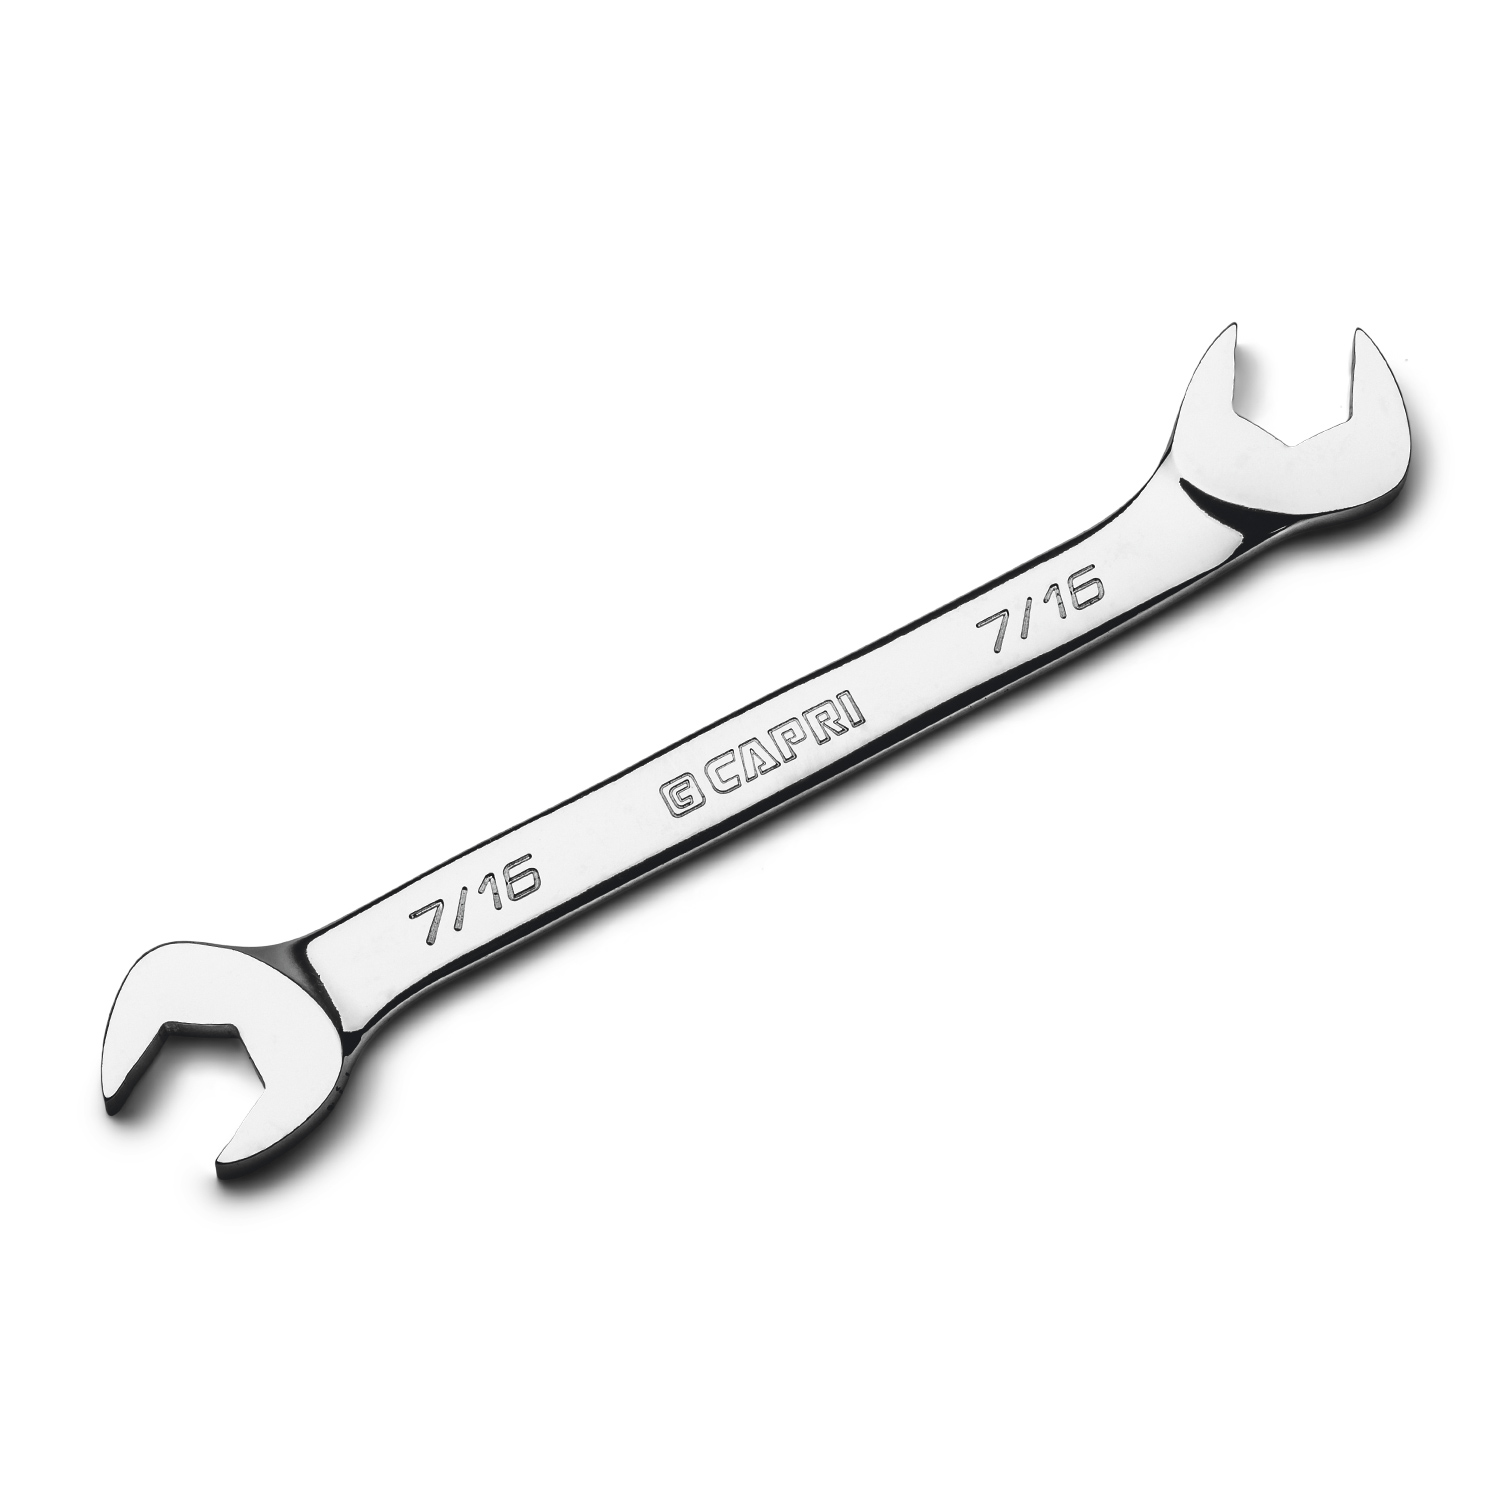 Capri Tools 7/16 in. Angle Open End Wrench, 30Â° and 60Â° angles, SAE